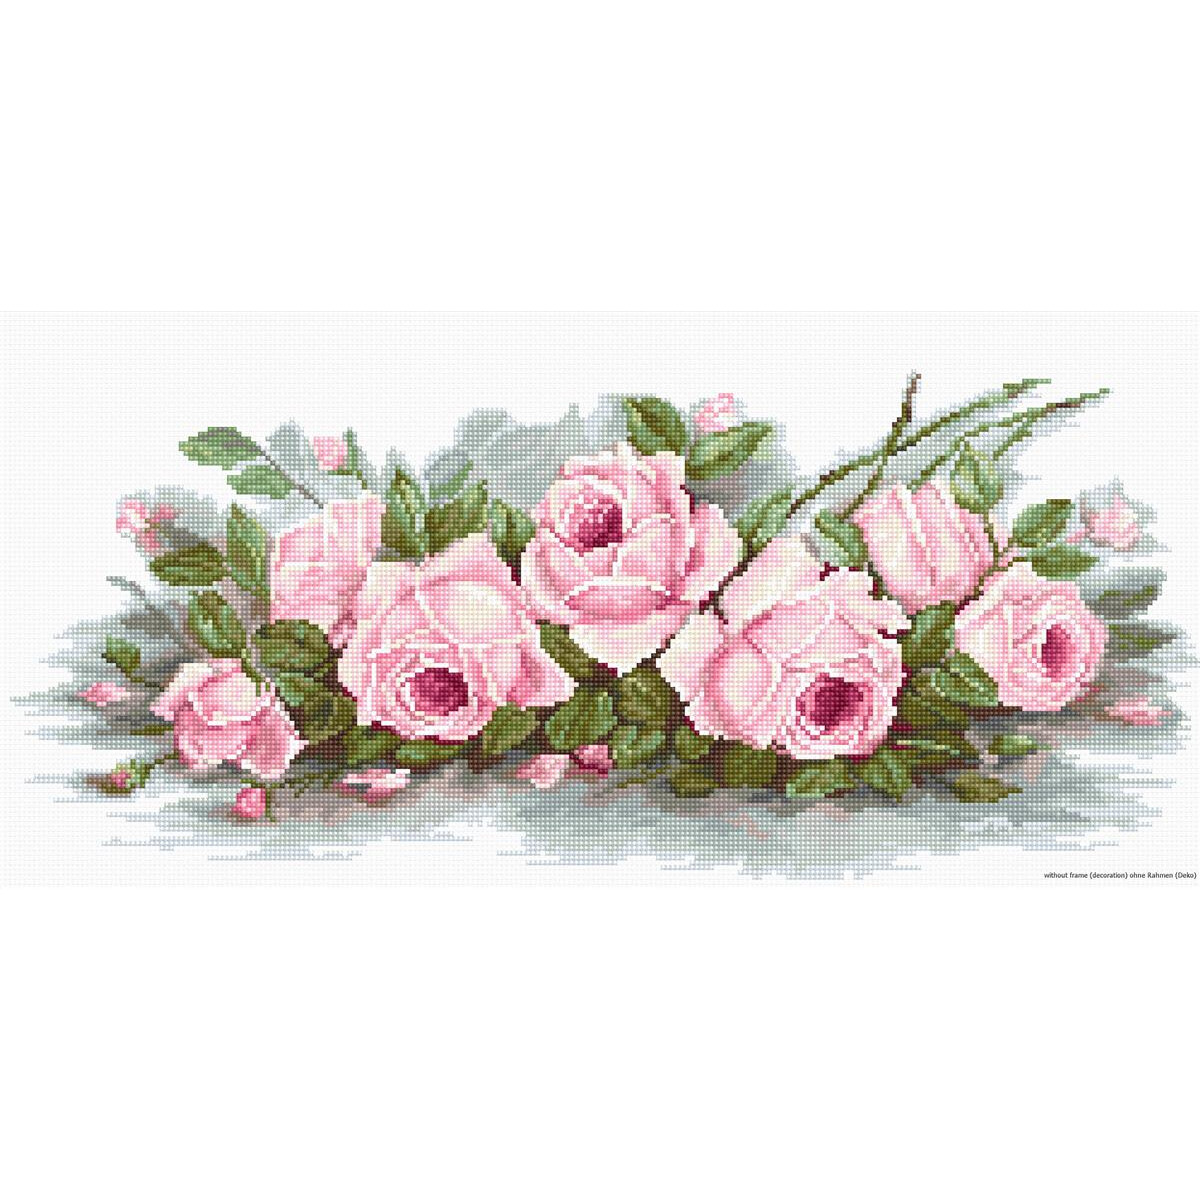 Luca-S counted Cross Stitch kit "Romantic Roses...